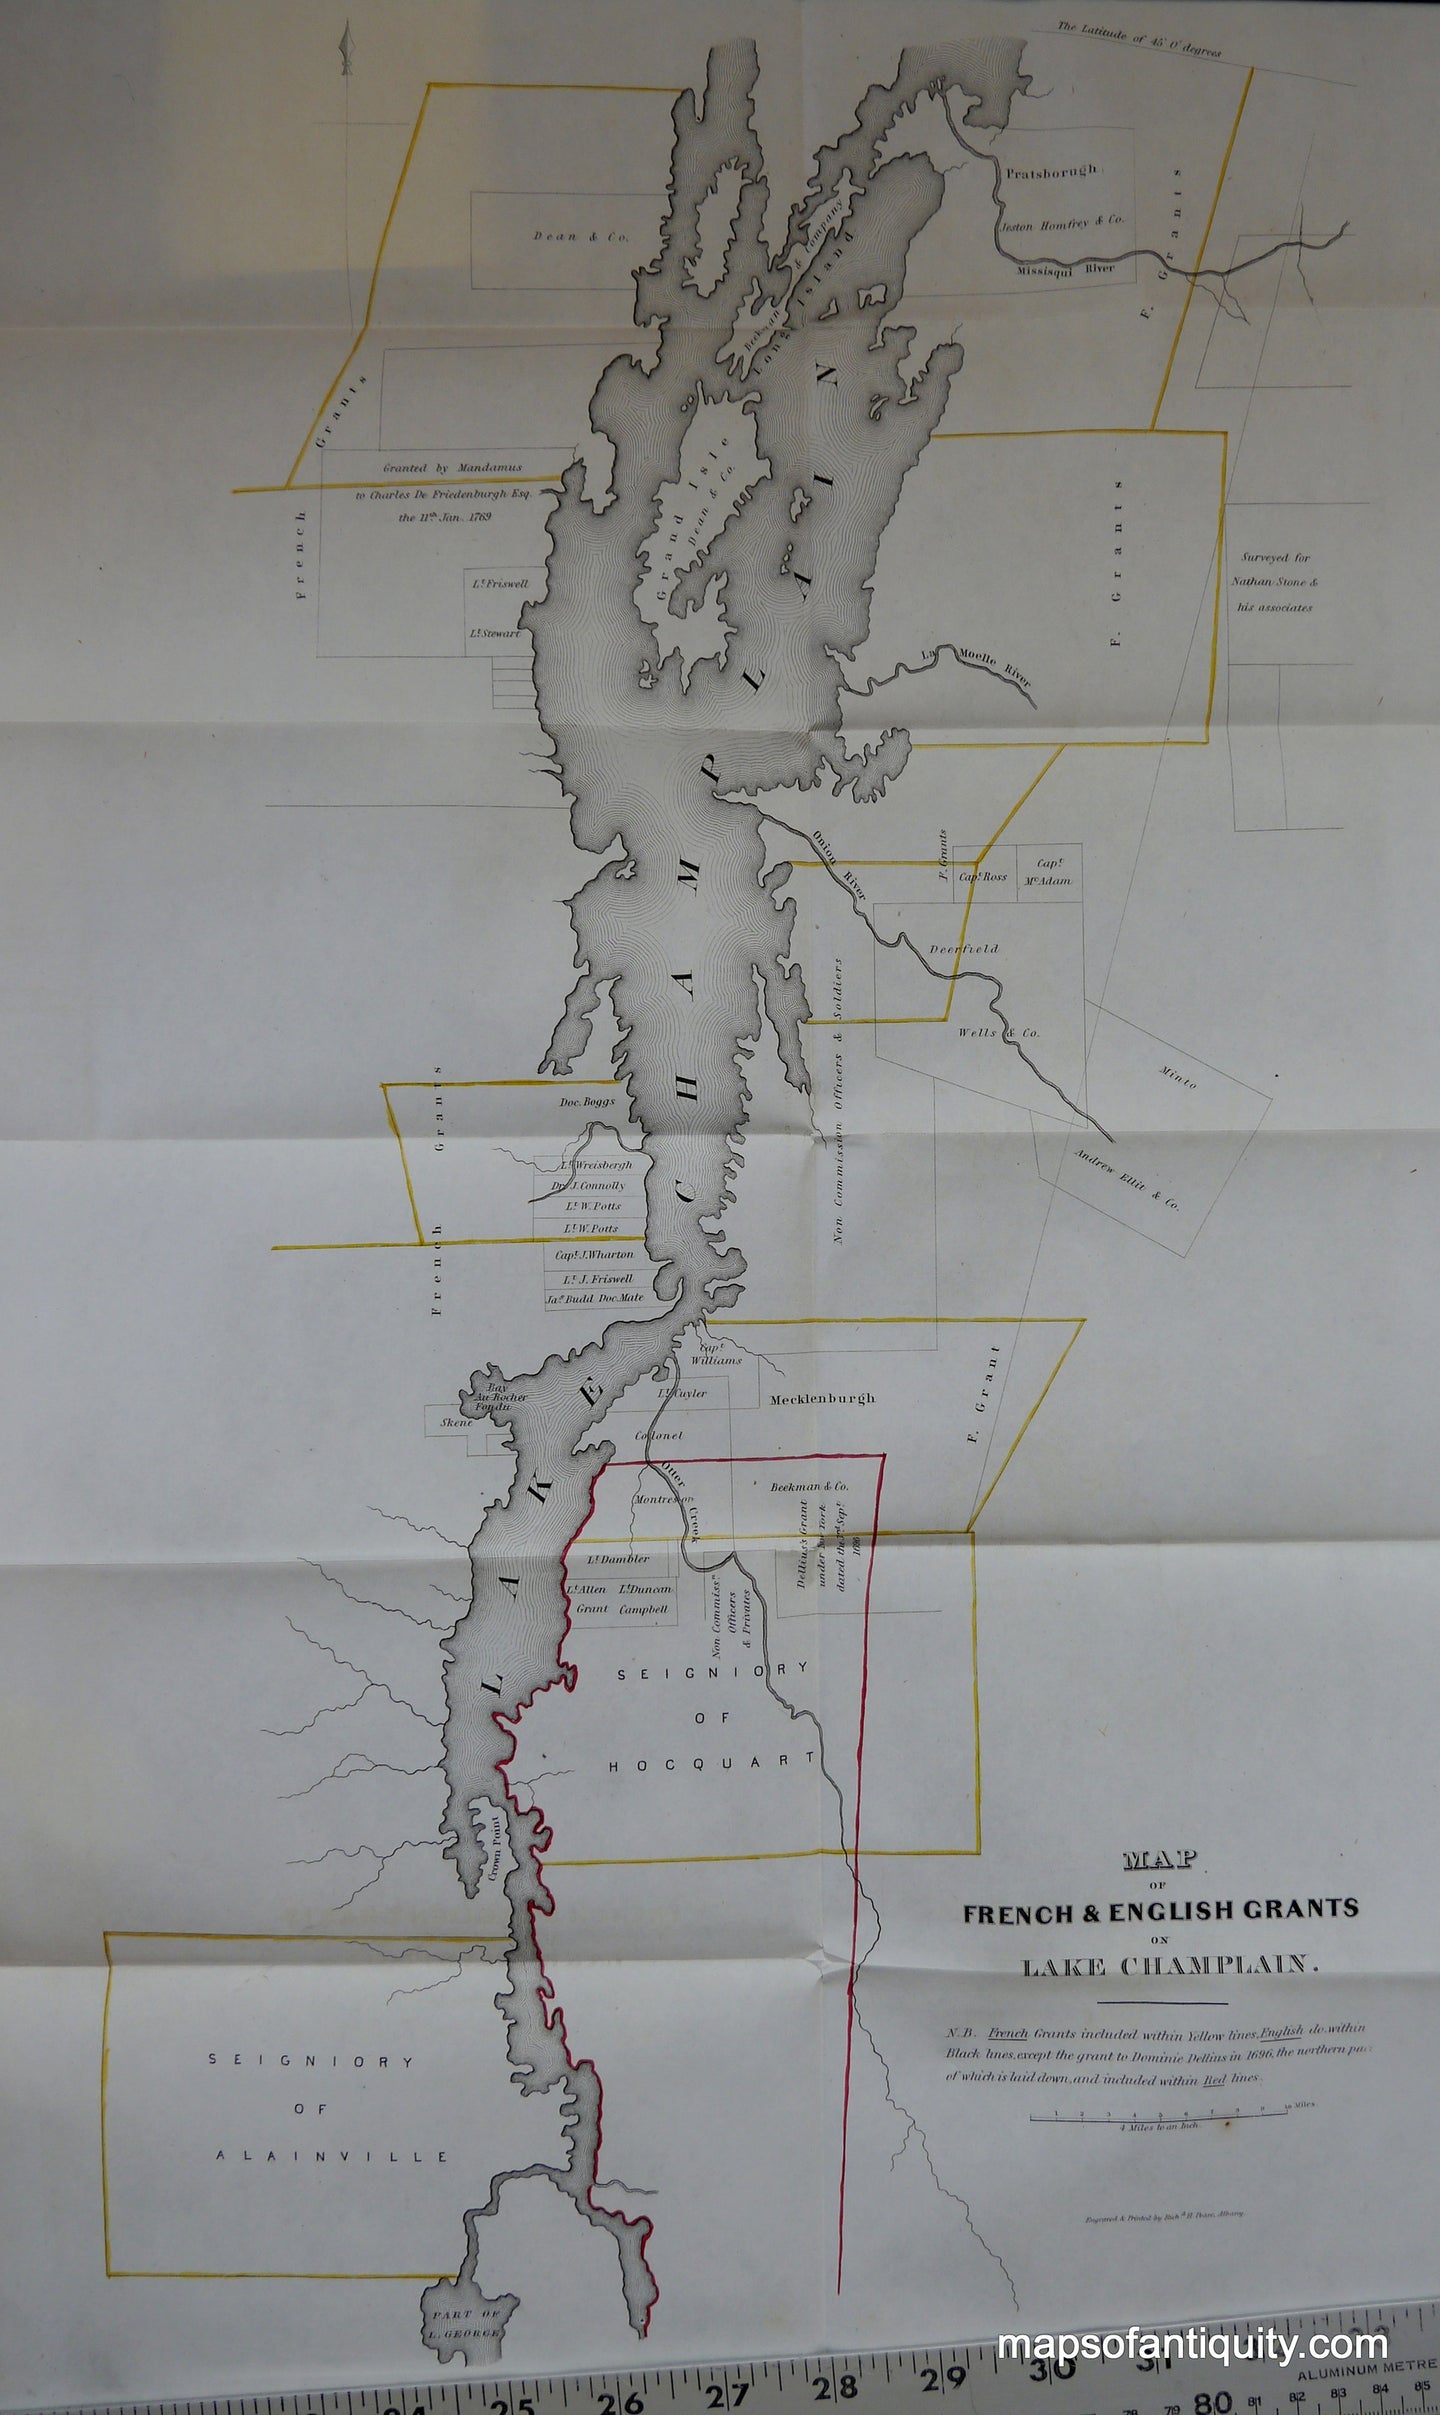 Antique-Map-Map-of-French-&-English-Grants-on-Lake-Champlain.**********-United-States-Northeast-1849-Pease-Maps-Of-Antiquity